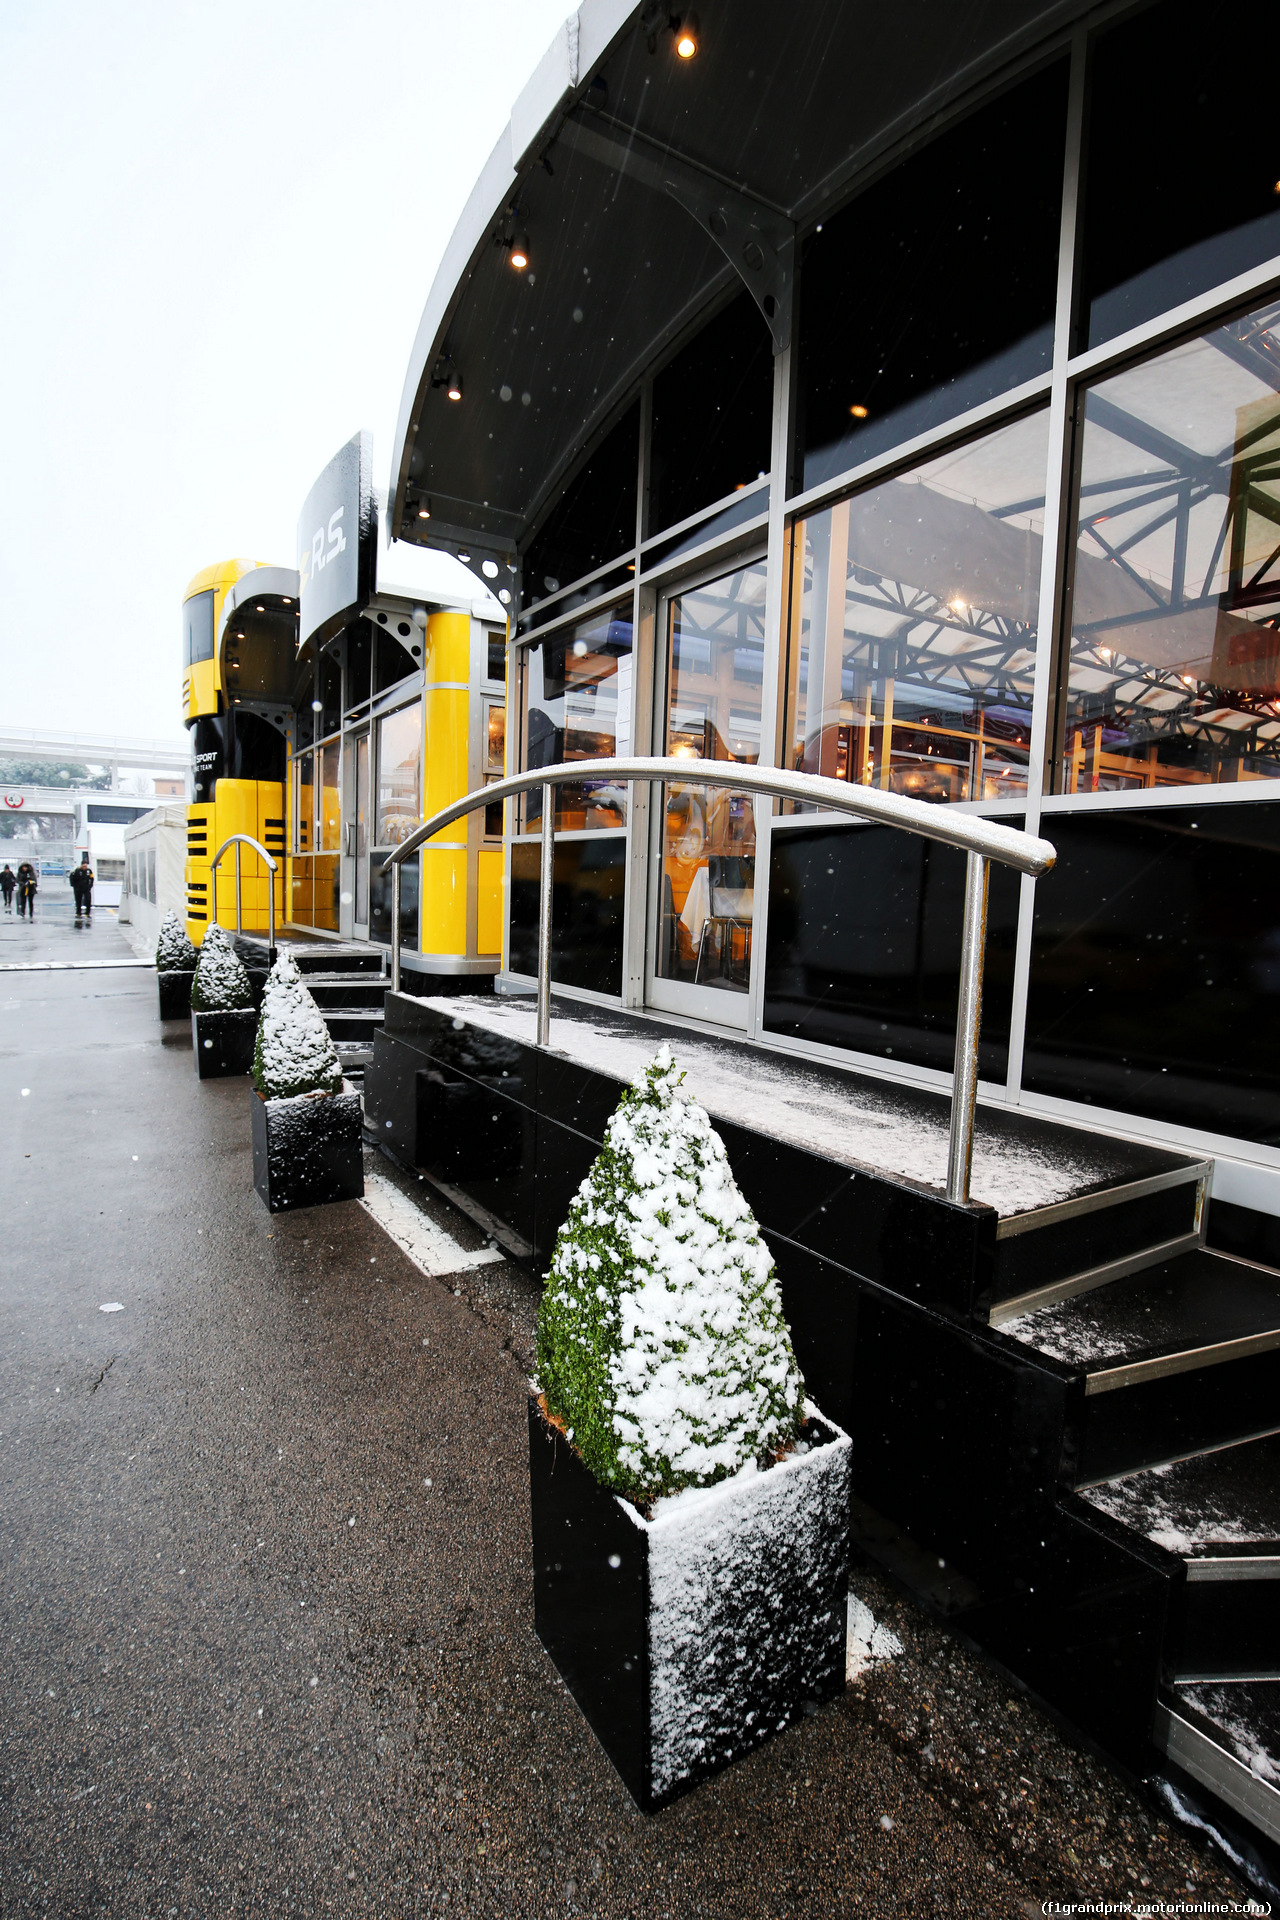 TEST F1 BARCELLONA 28 FEBBRAIO, Renault Sport F1 Team motorhome with snow.
28.02.2018.